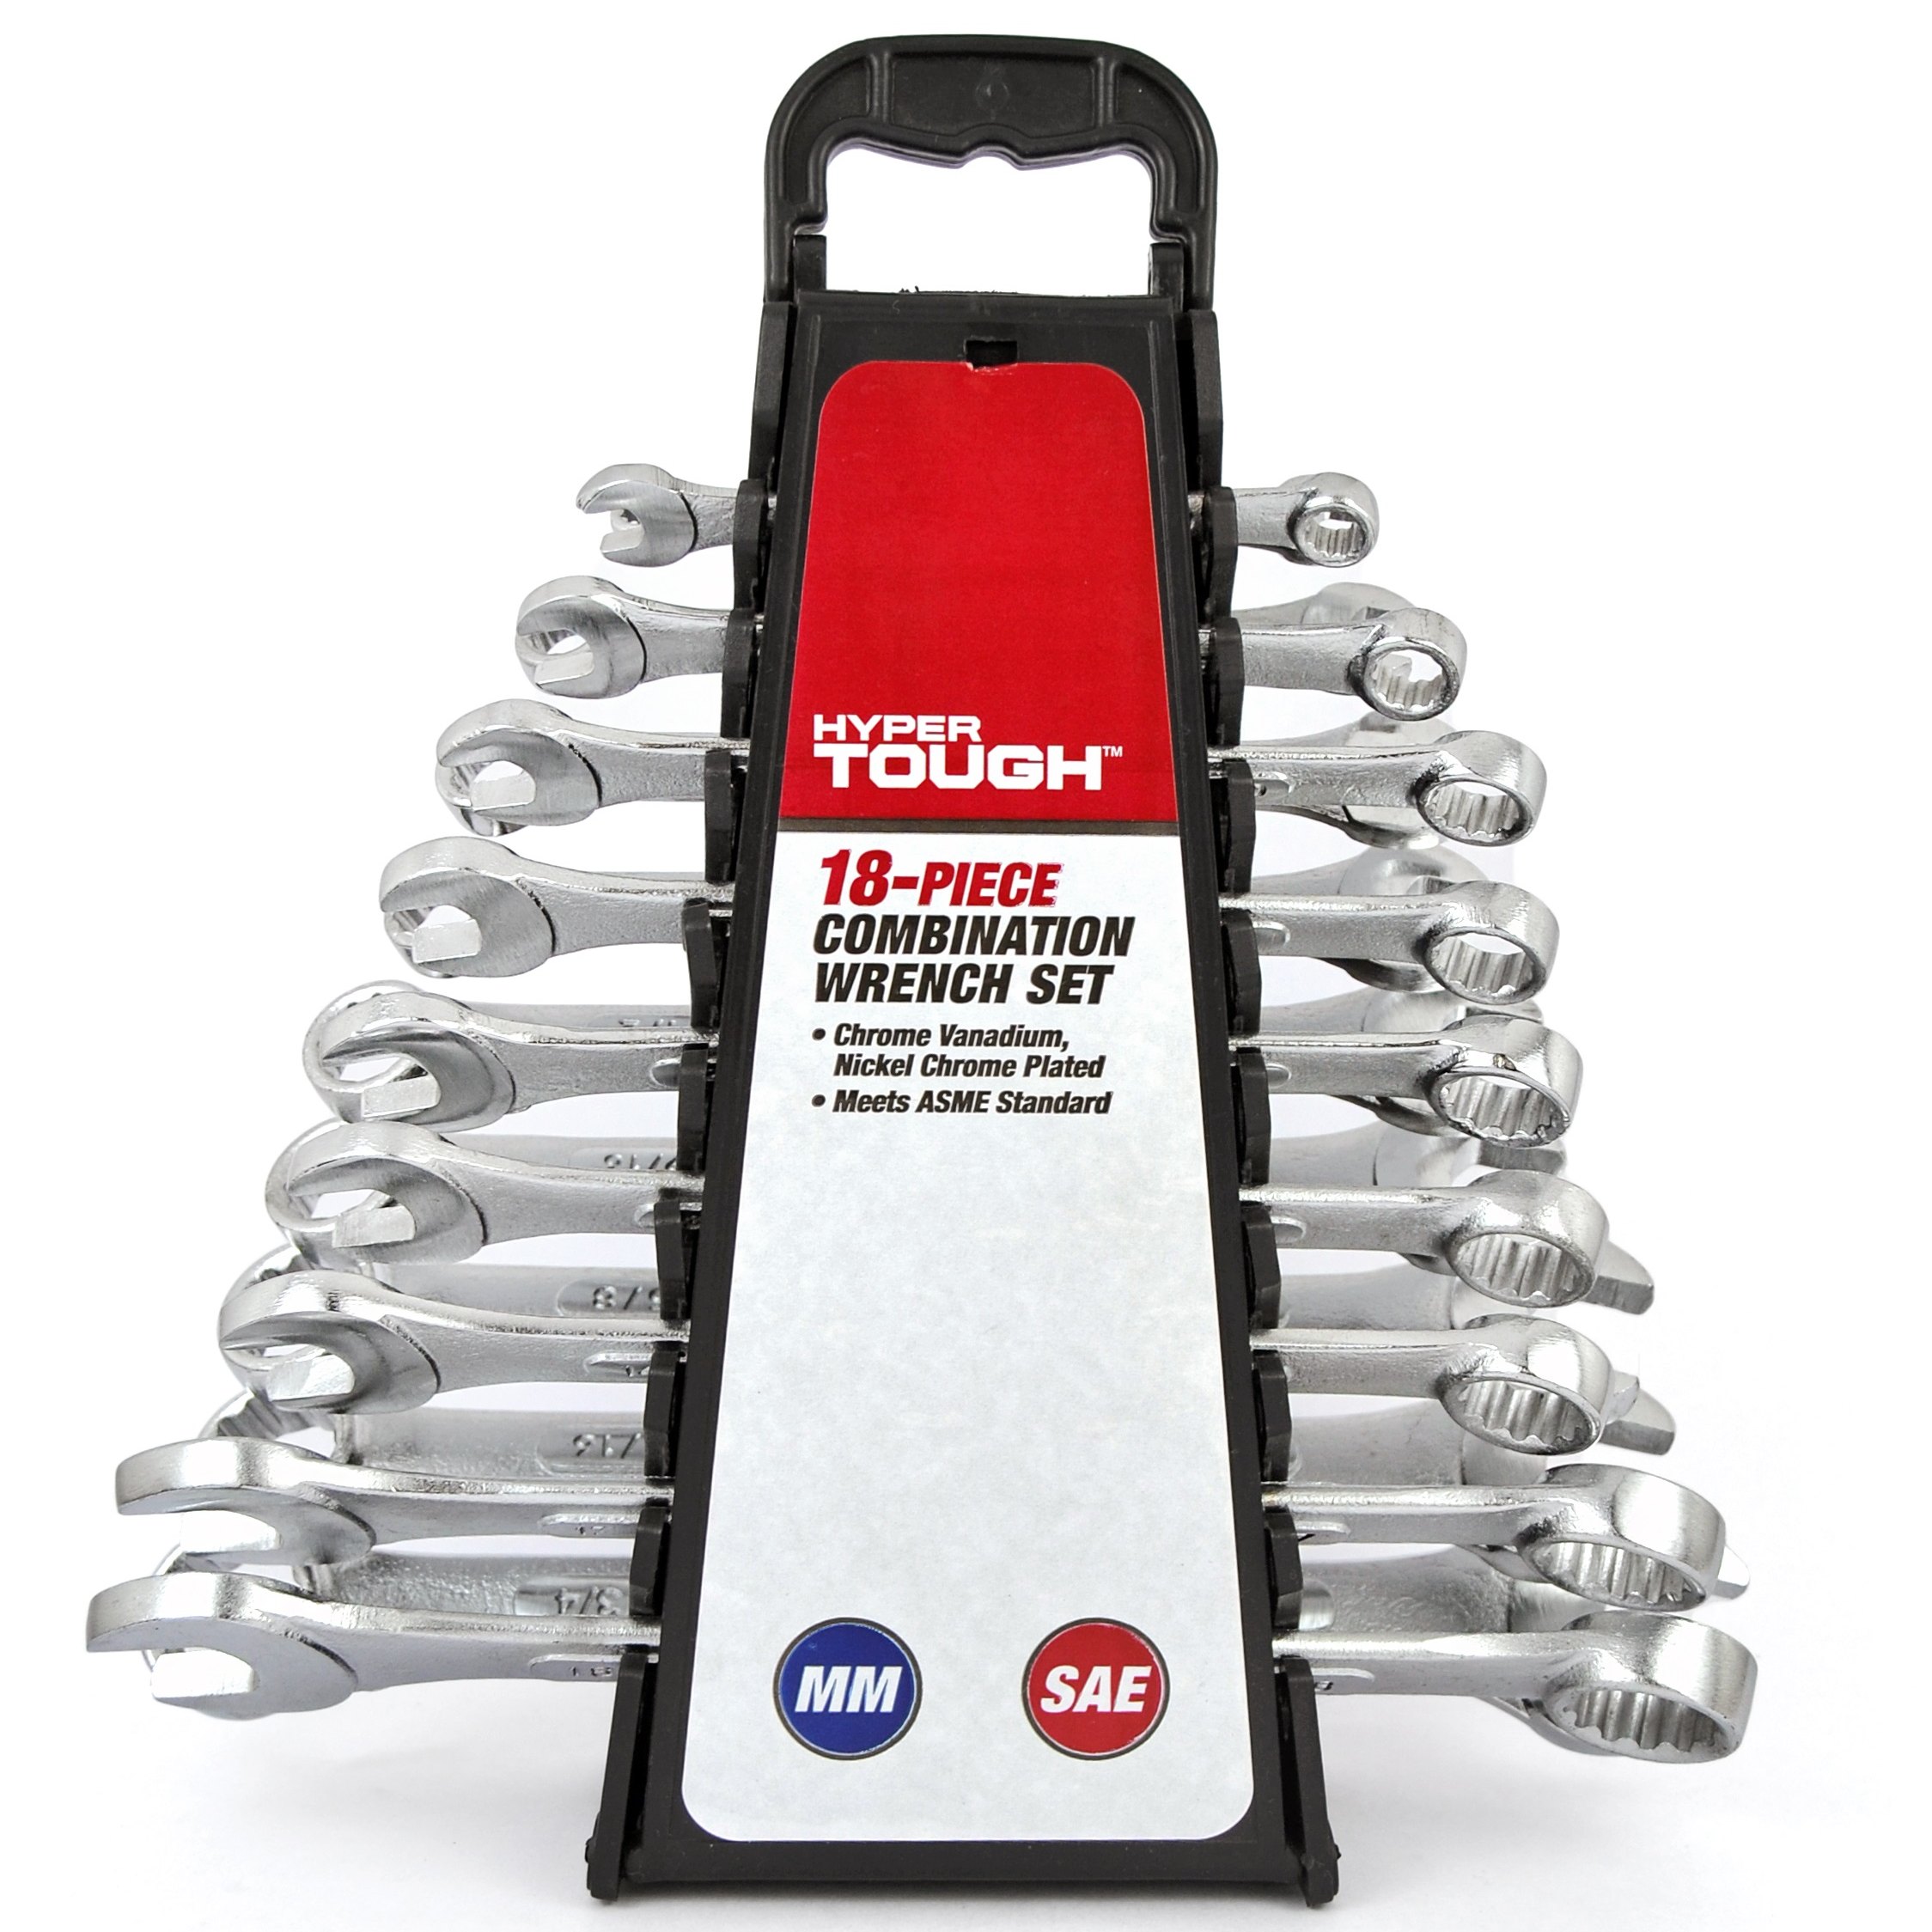 Hyper Tough 18-Piece Combination Wrench Set, Metric & SAE - image 1 of 7